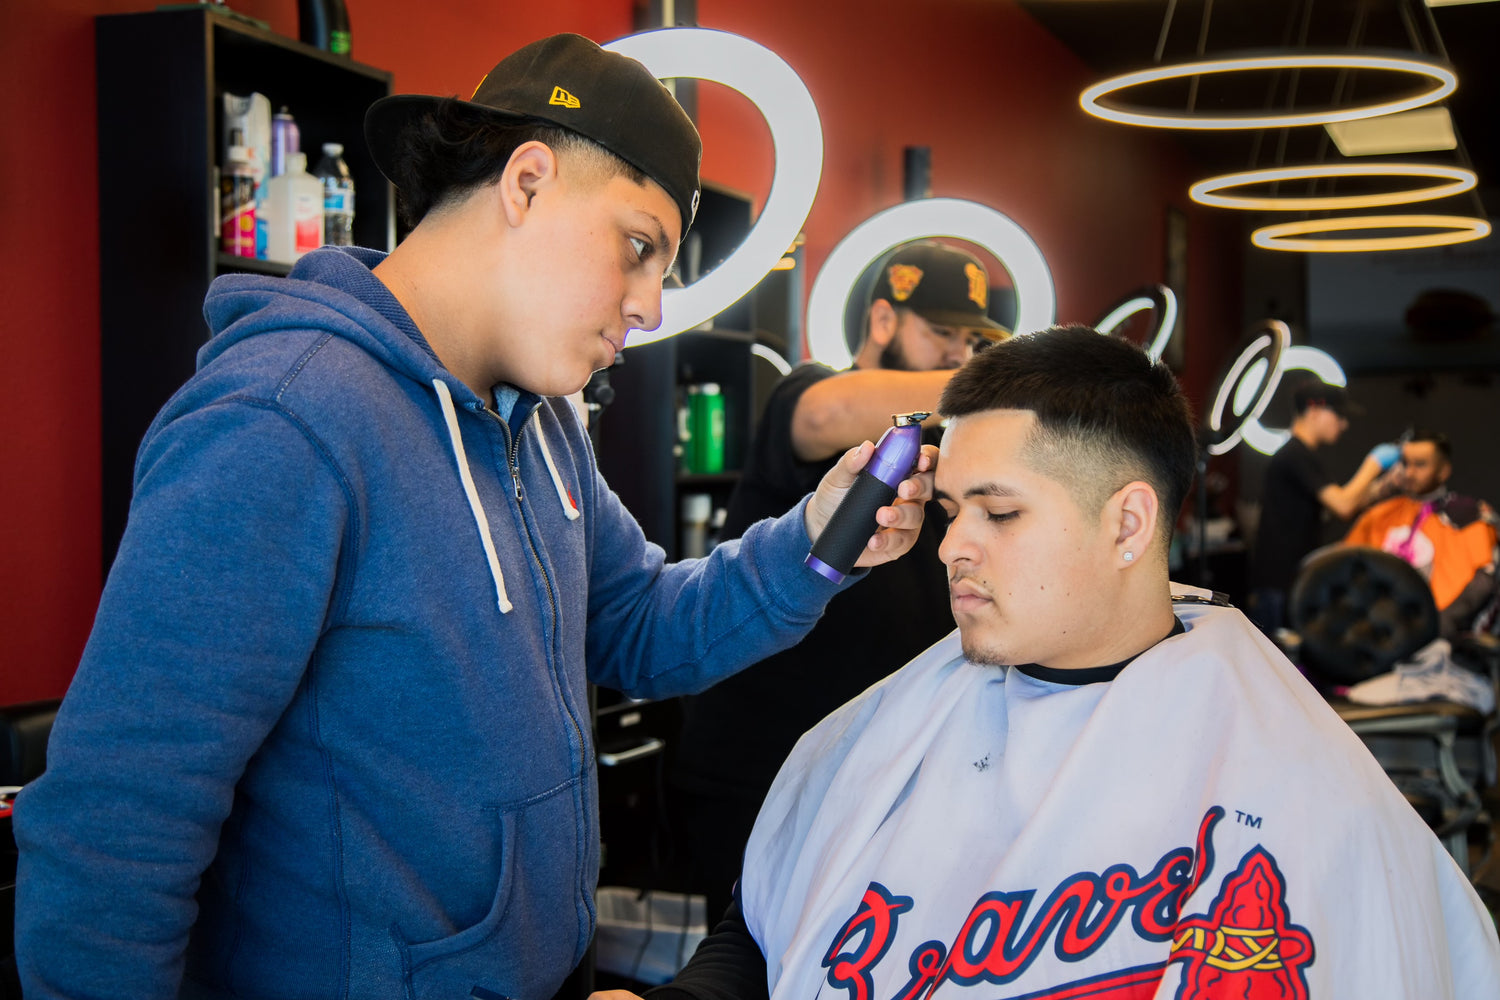 Barber in a blue sweater giving a client a haircut